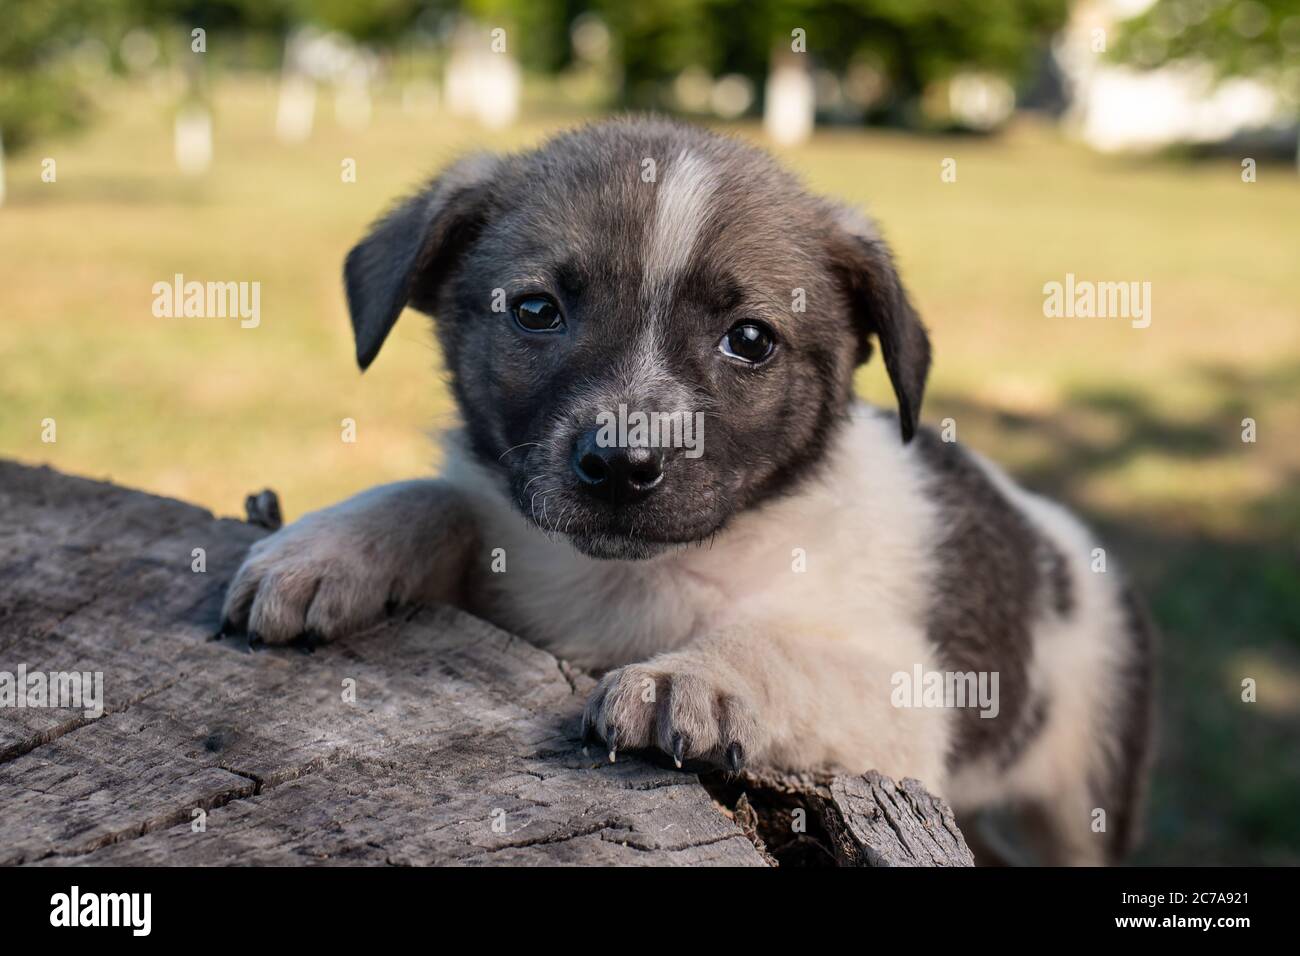 A little pooch sits on the street on a stump. Beautiful cute dog aged 2 months, pet. Stock Photo